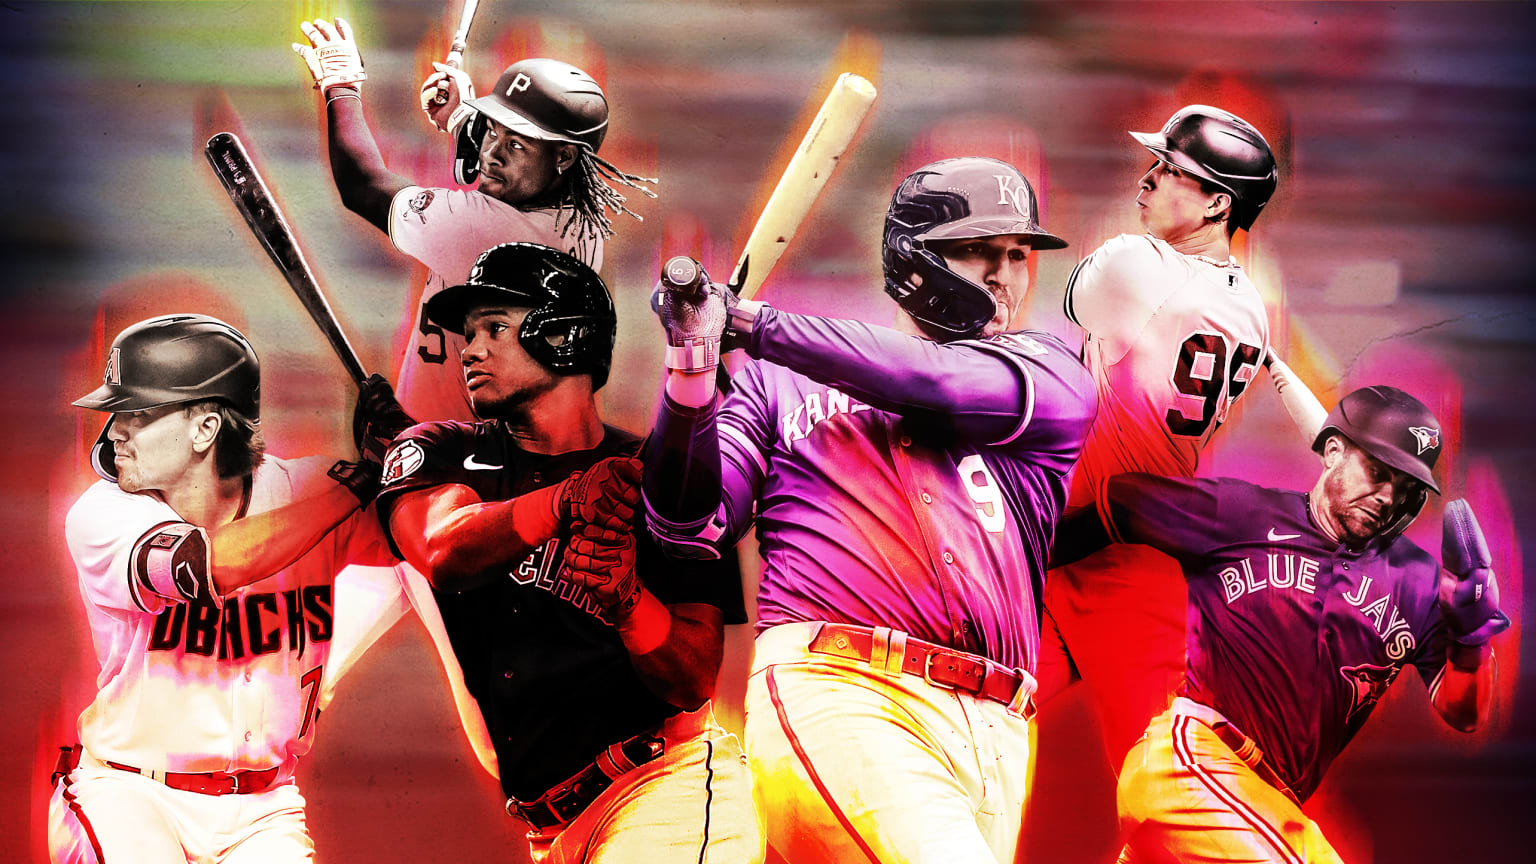 Six players are featured in a photo illustration